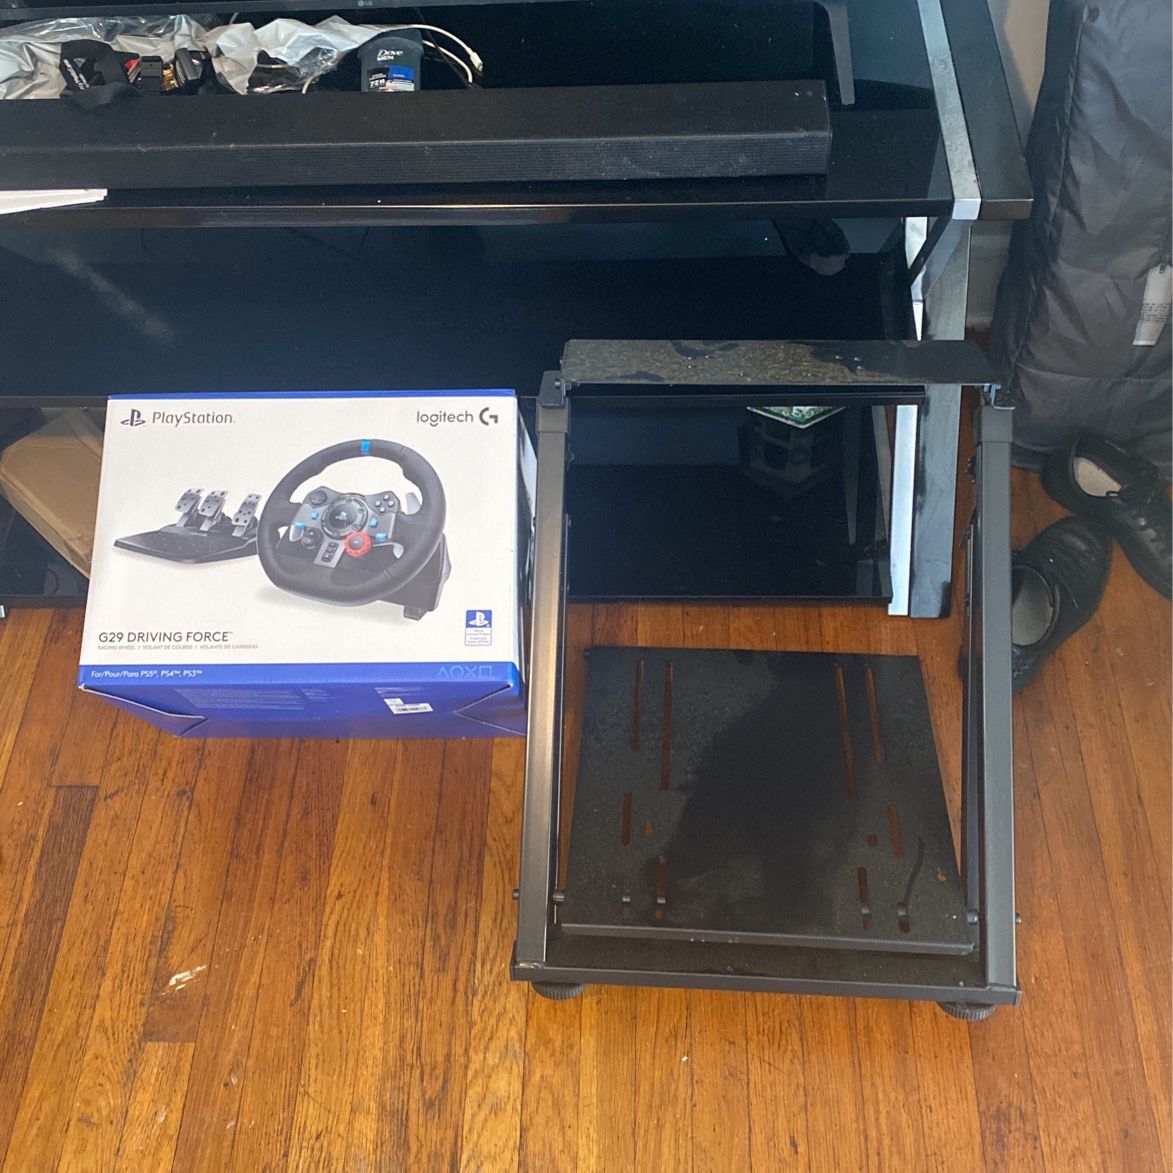 Playstation Logitech Steering Wheel And Stand